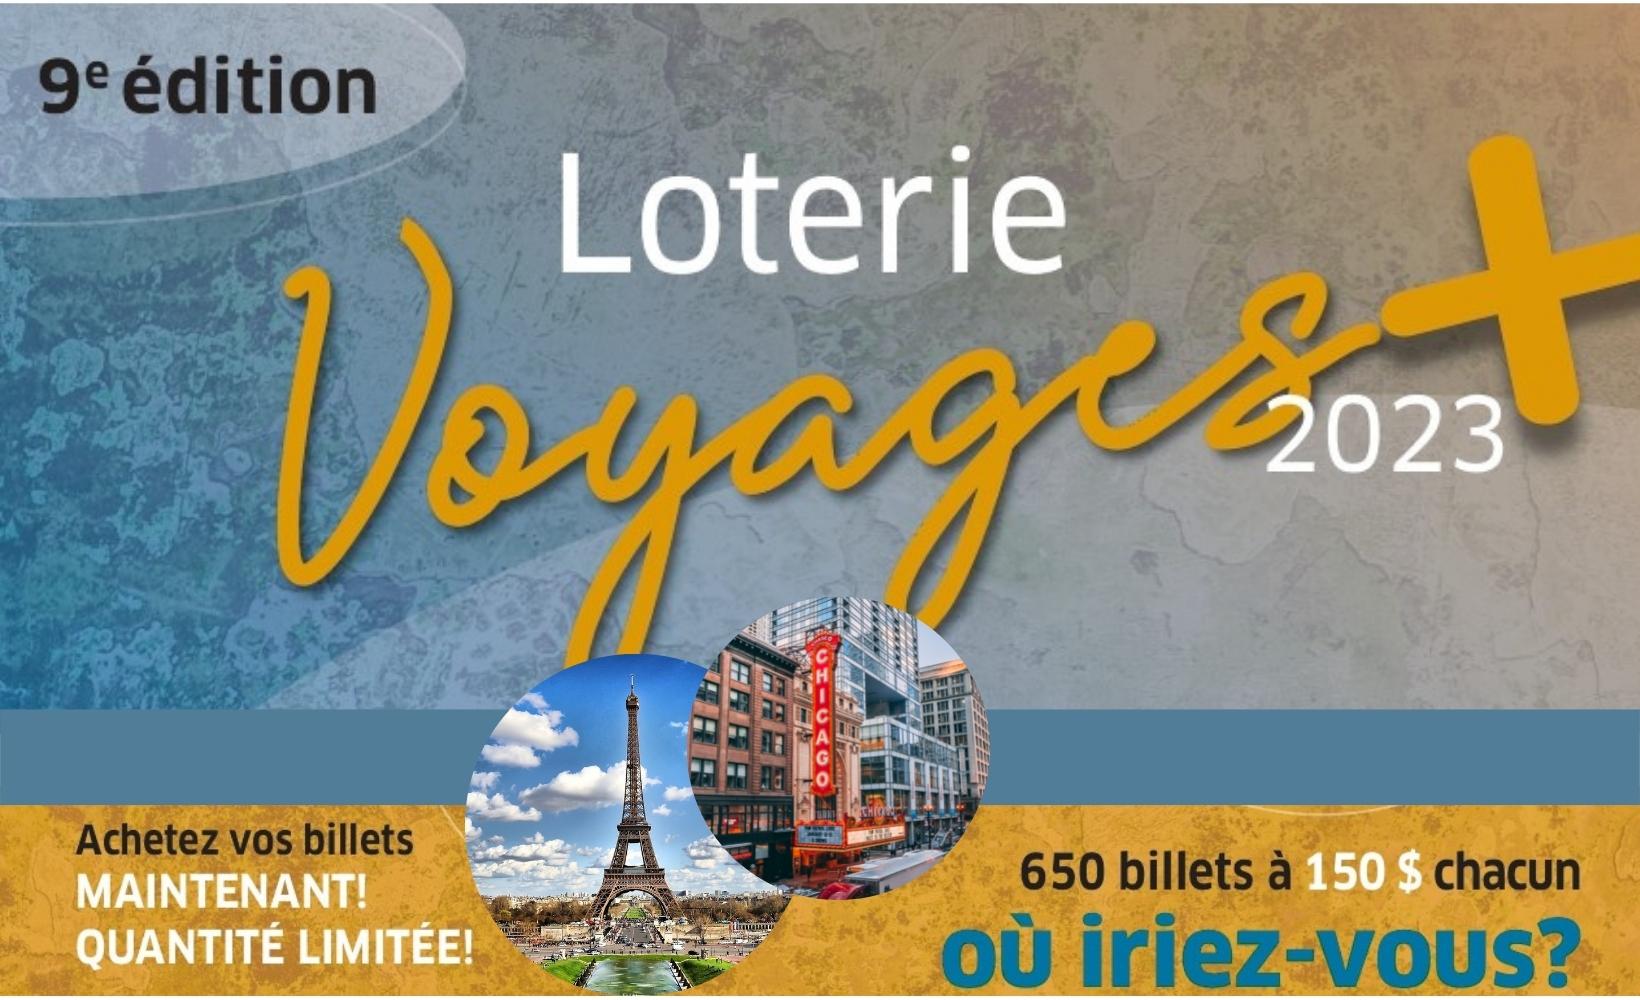 Loterie-Voyages 2023